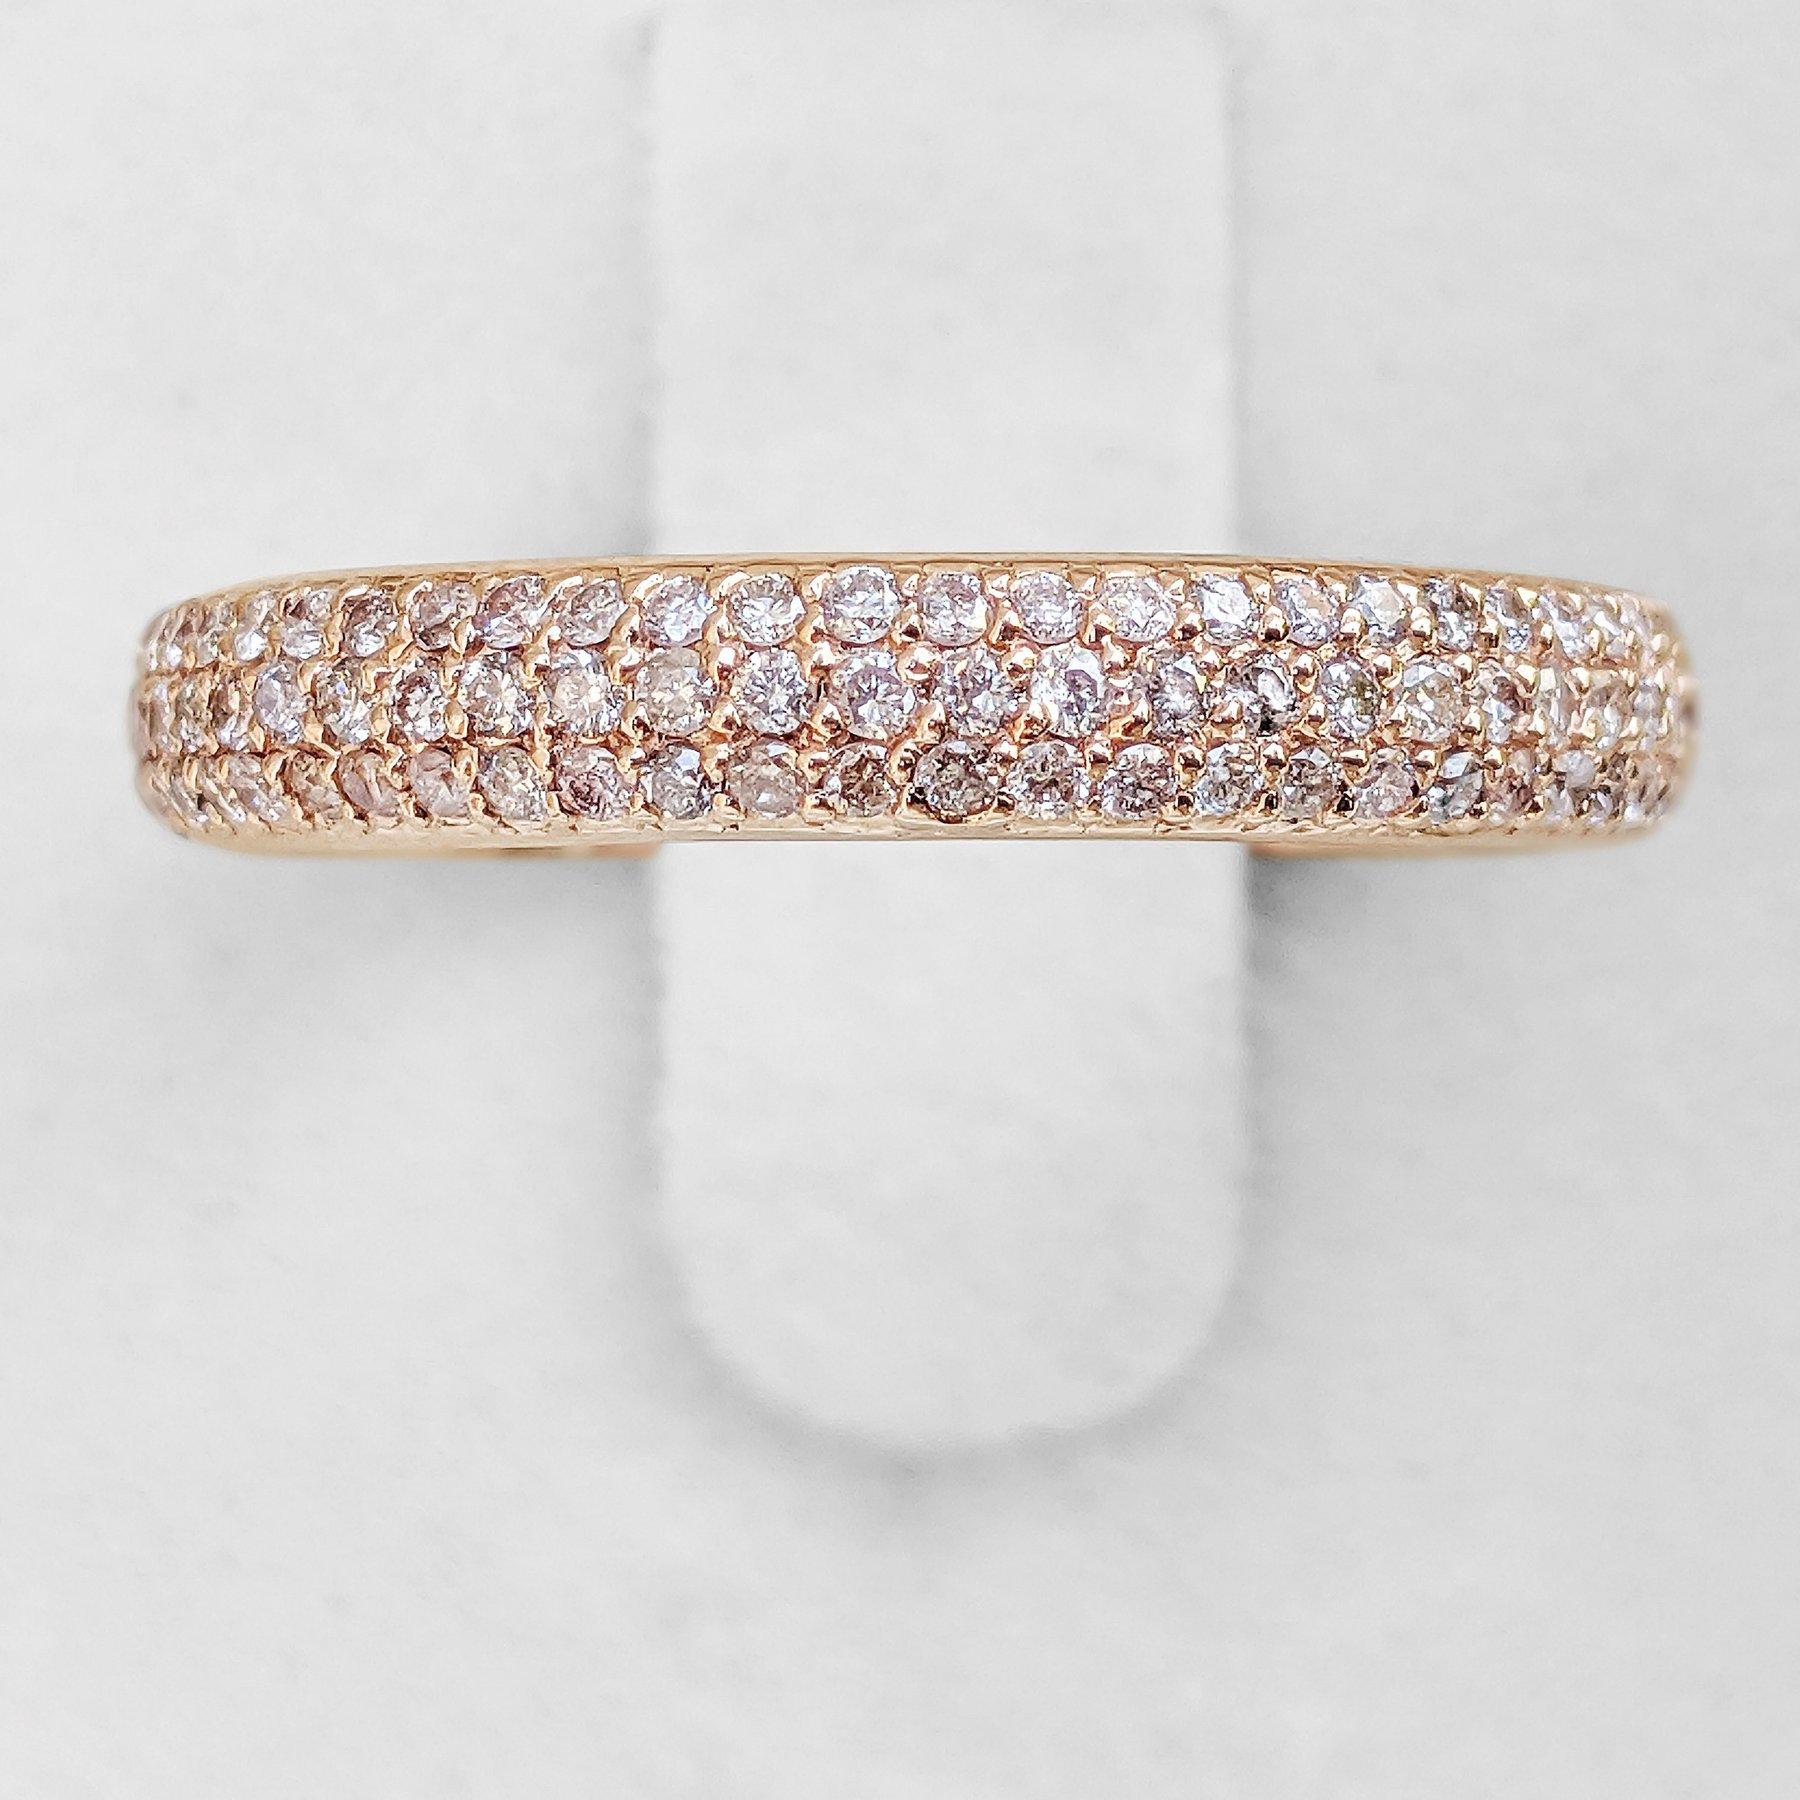 Art Deco NO RESERVE! 1.01Ct Fancy Diamonds Eternity Band - 14 kt. Rose gold - Ring For Sale